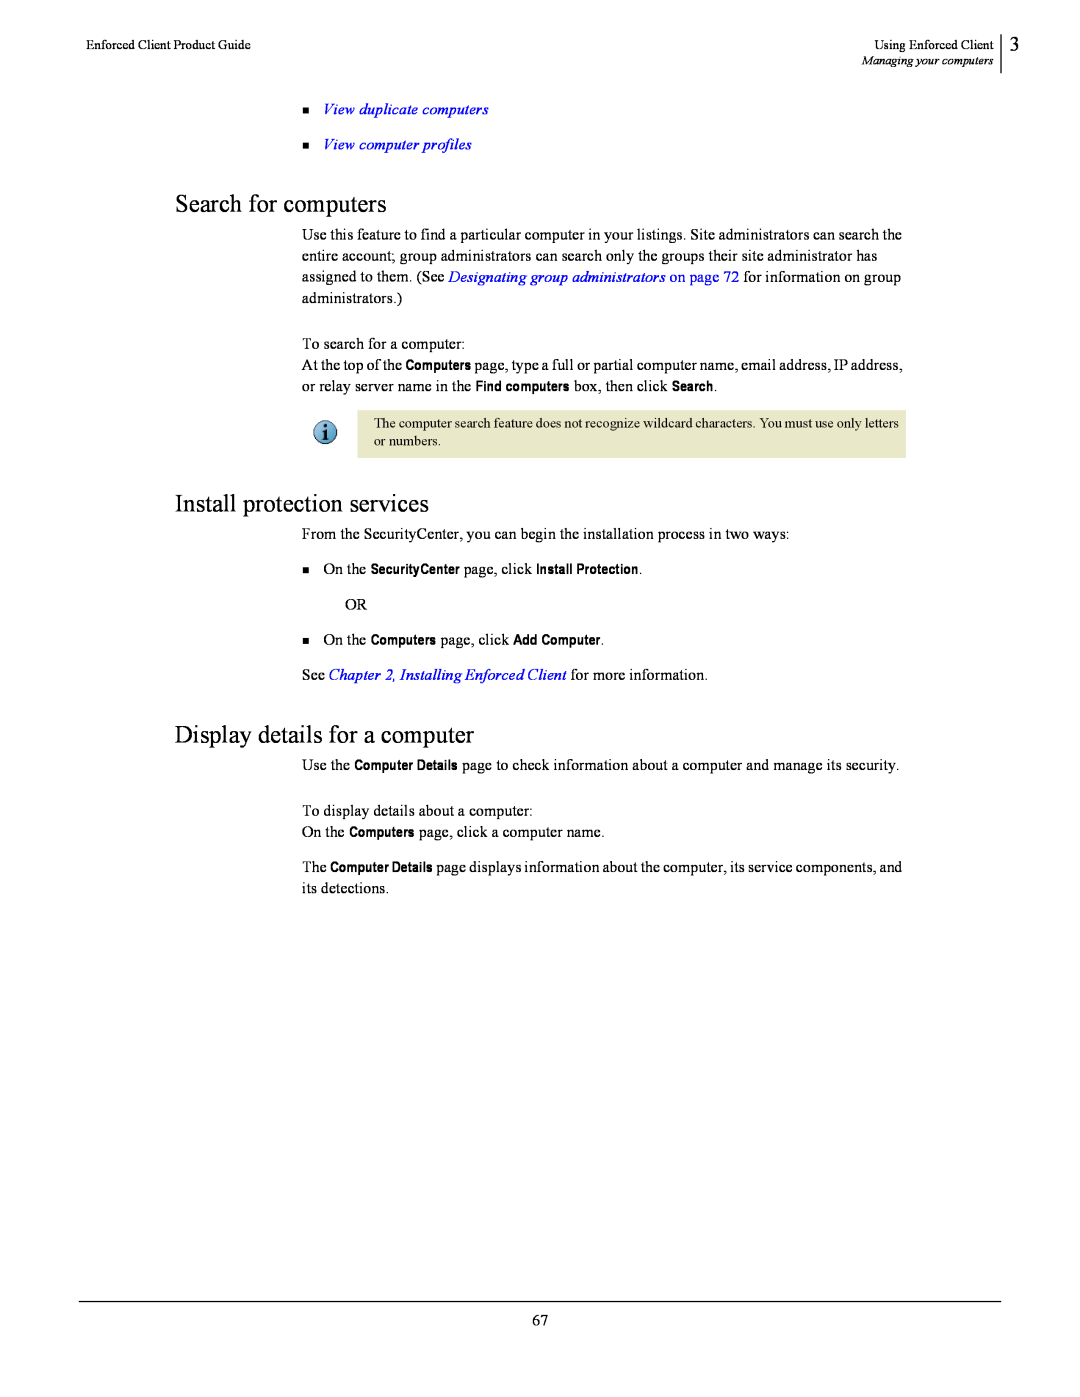 SonicWALL 4.5 manual Search for computers, Display details for a computer, Install protection services 